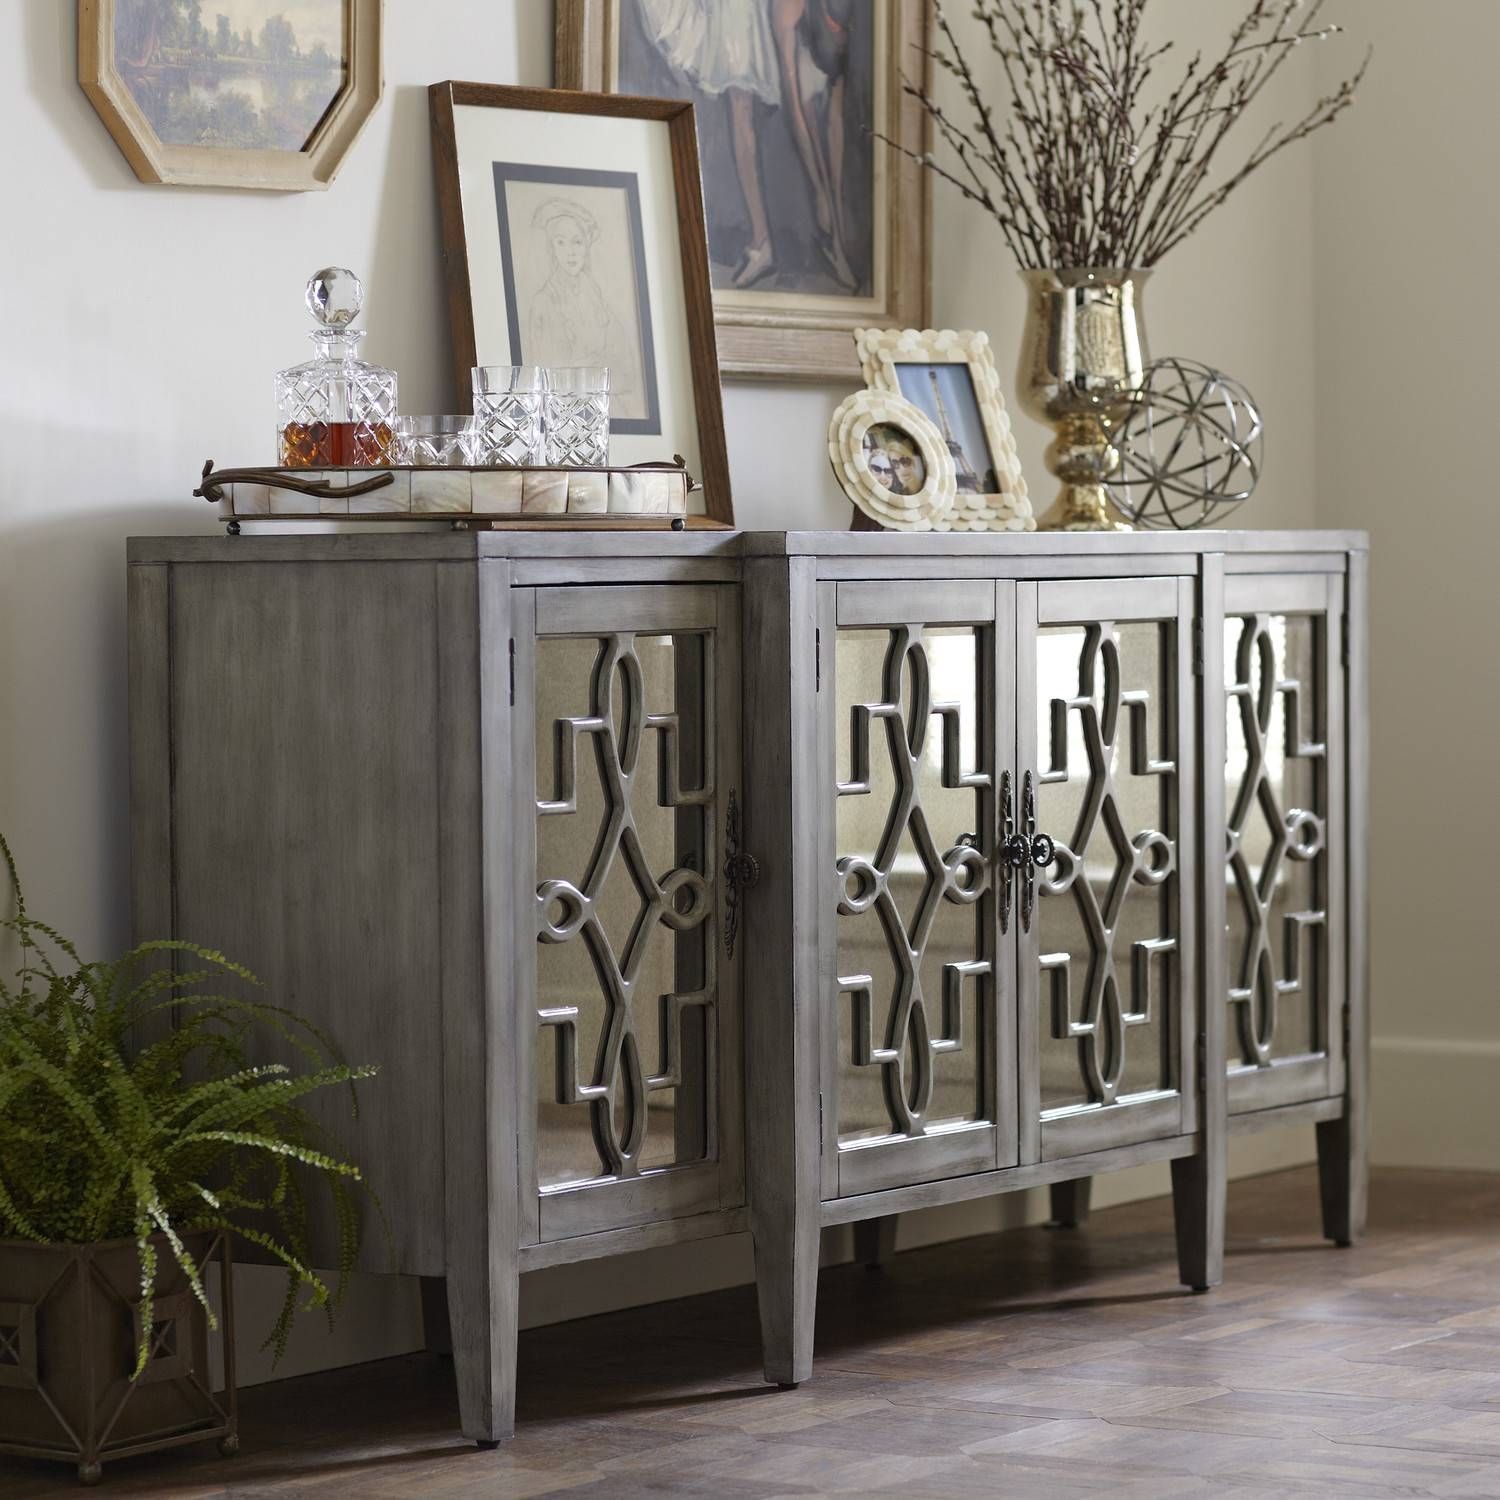 Lovely Mirrored Buffet Sideboard – Bjdgjy Intended For Most Recent Mirrored Buffet Sideboards (Photo 5 of 15)